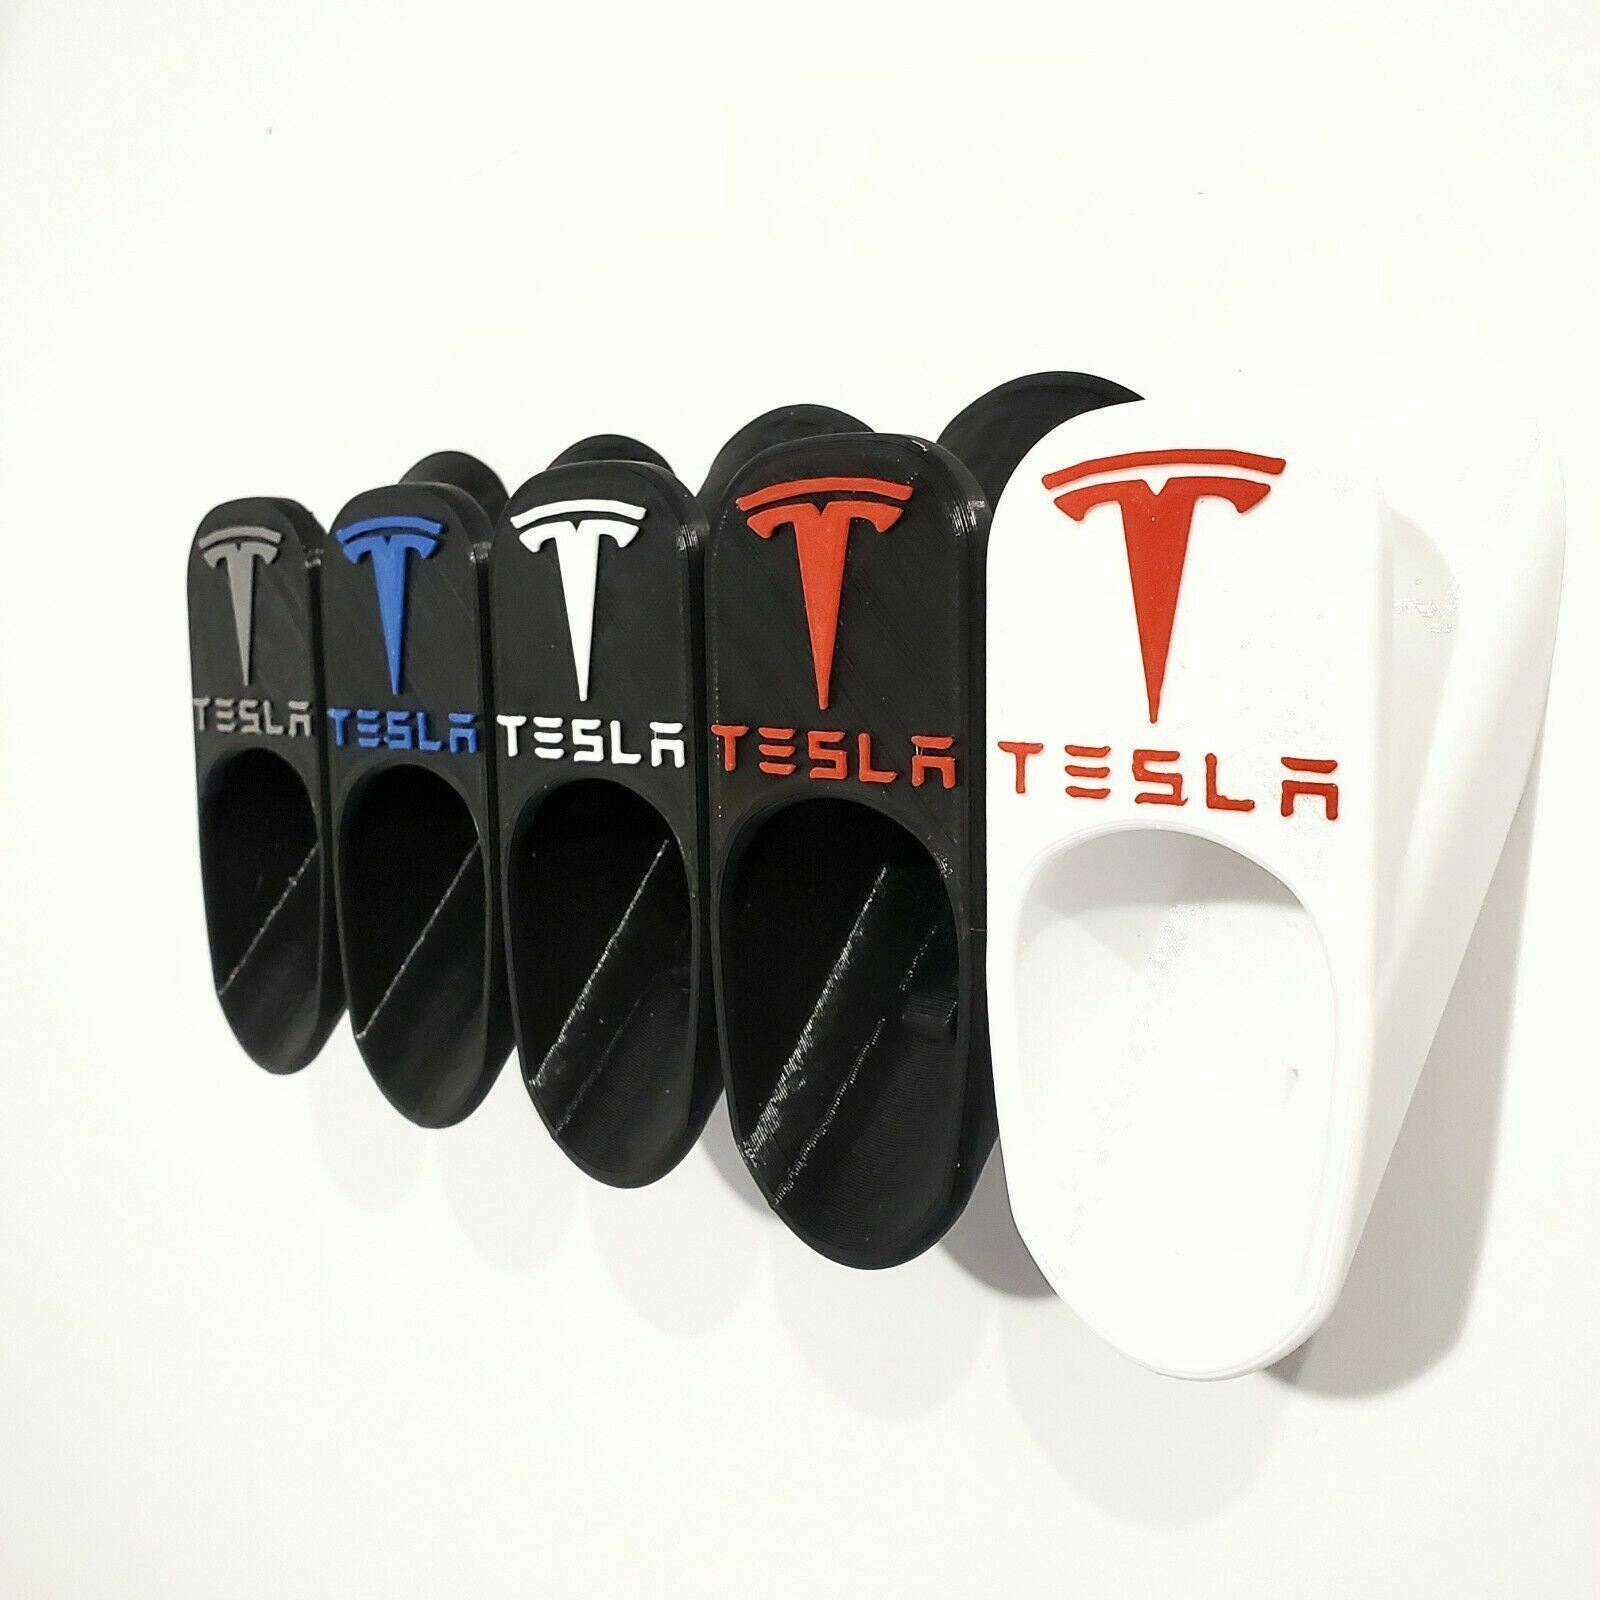 Tesla Charger Cable Organizer Holder Wall Mount For Model 3 X S